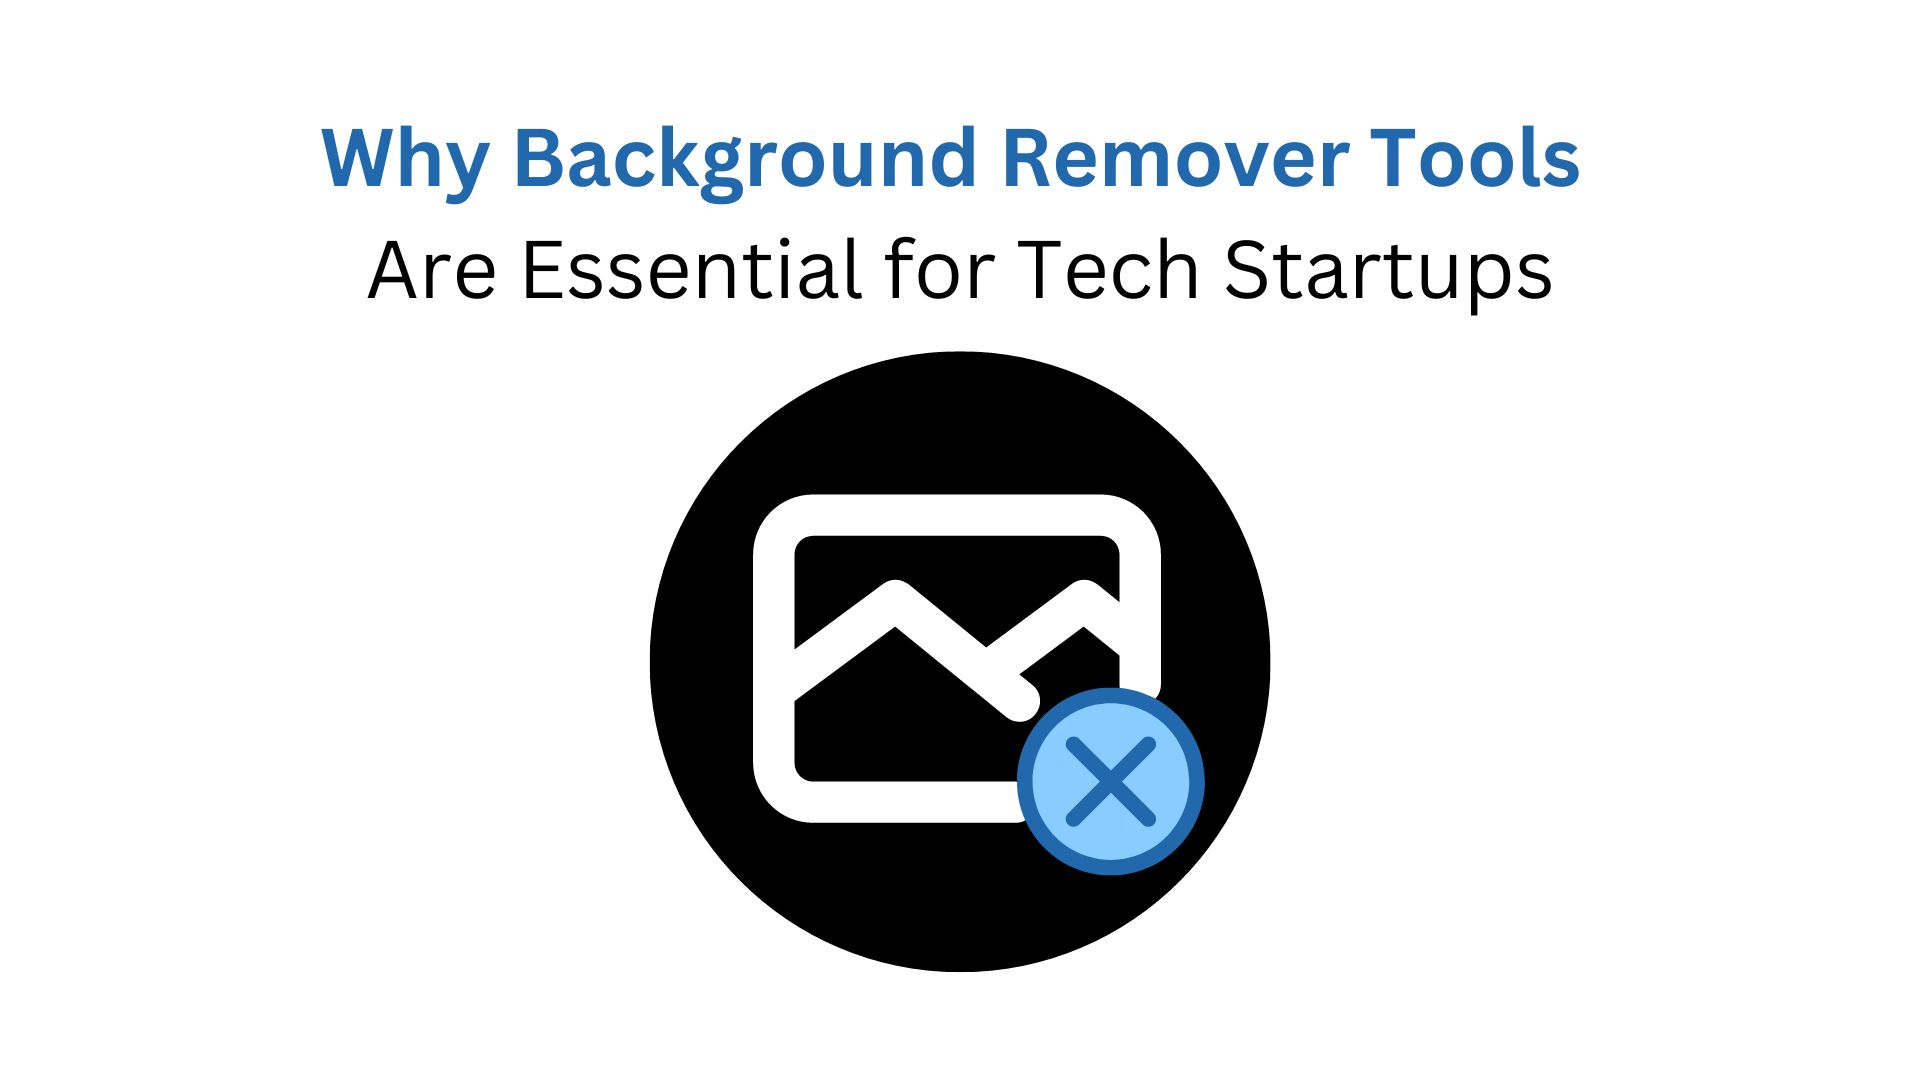 Why Background Remover Tools Are Essential for Tech Startups